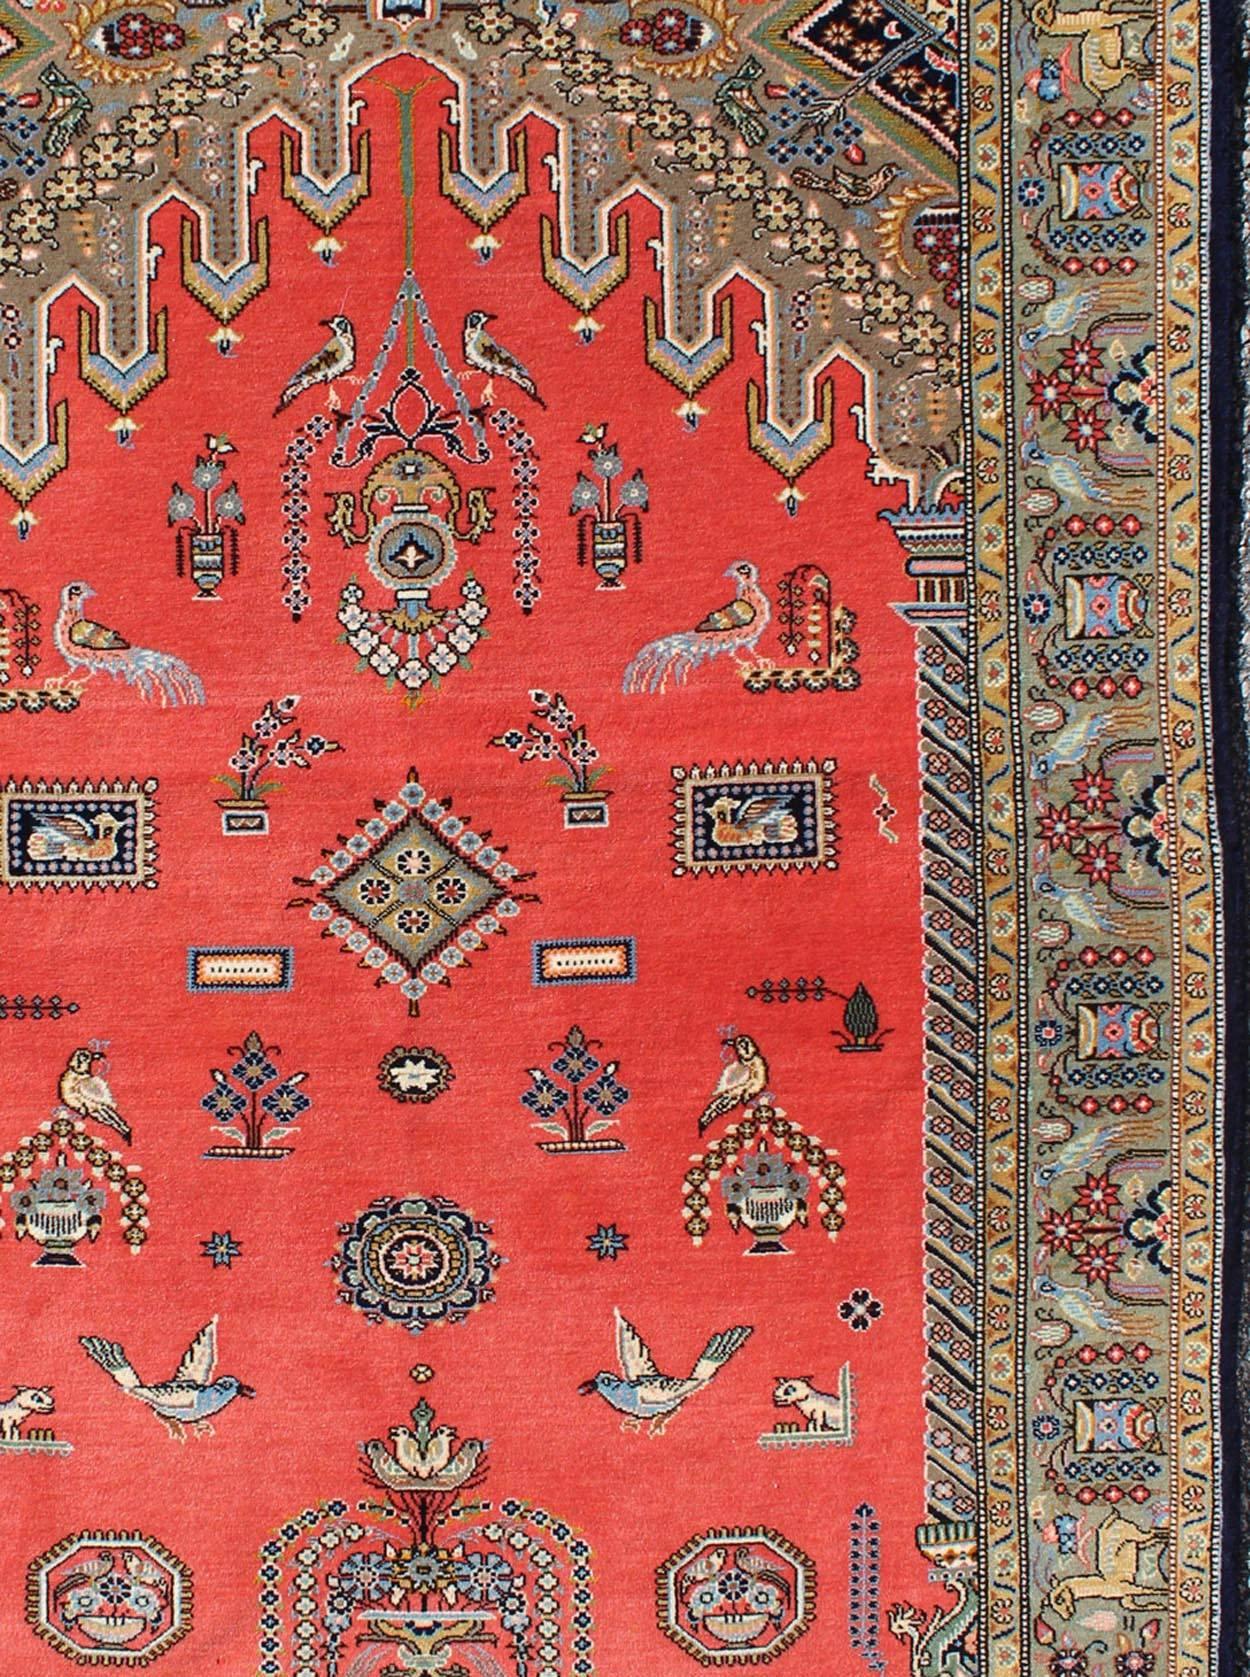 Hand-Knotted Vintage Fine Persian Qum Prayer Rug With Soft Red Field in Mihrab Design For Sale